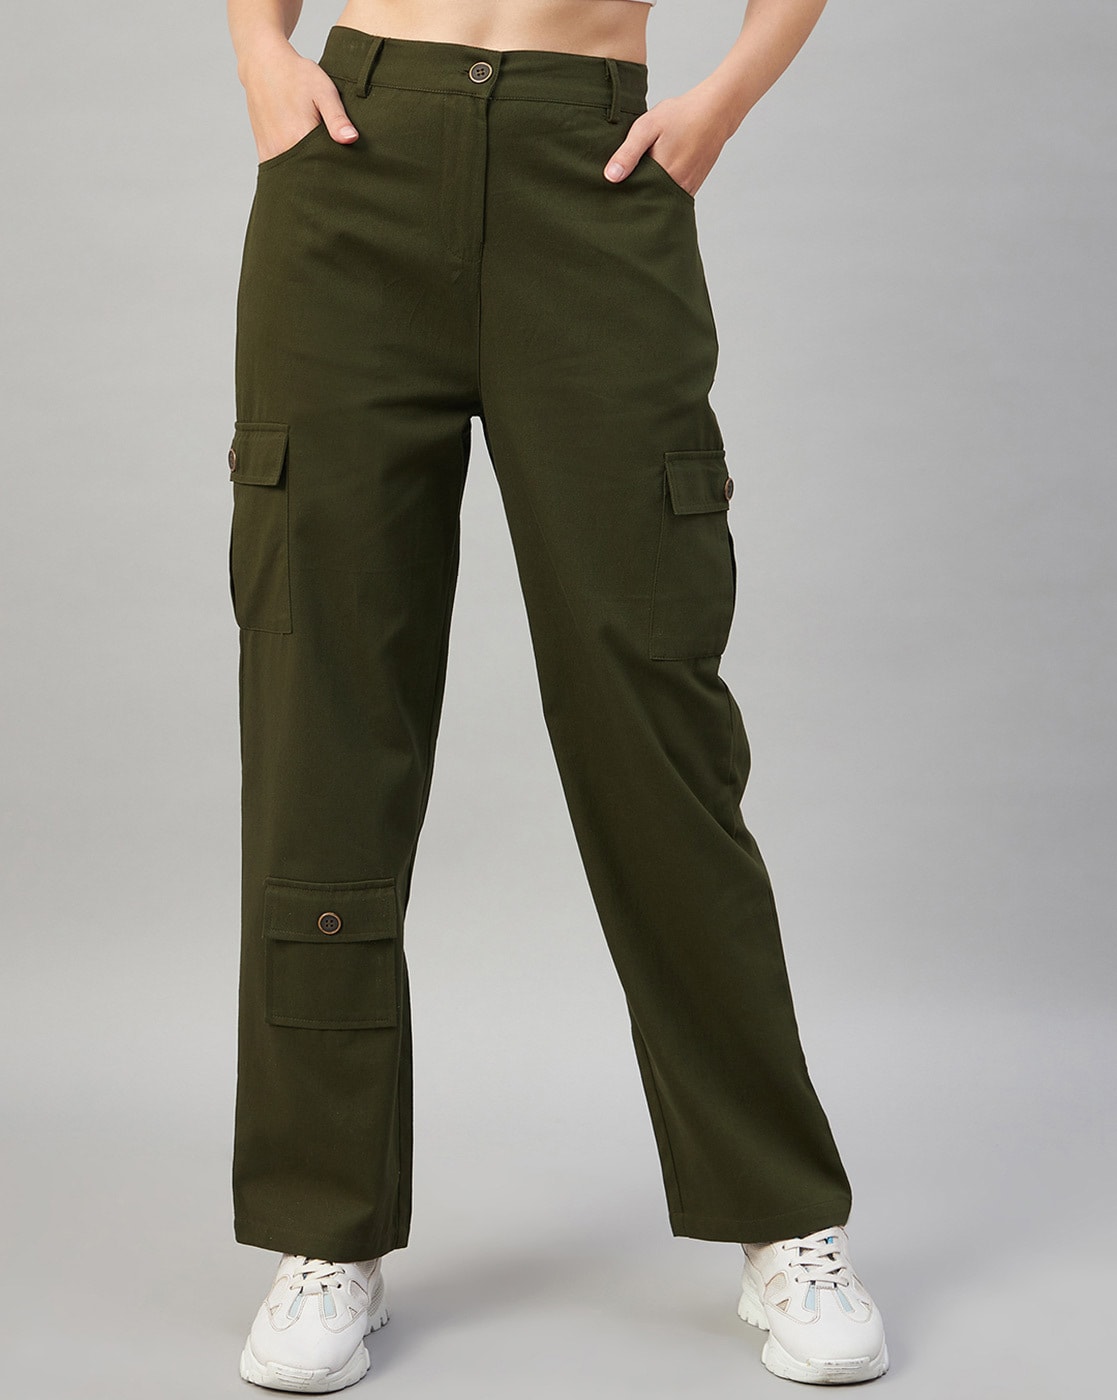 GENTS OLIVE MILITARY COMBAT TROUSERS 100% cotton green Mens OG NATO cargo  pants | eBay